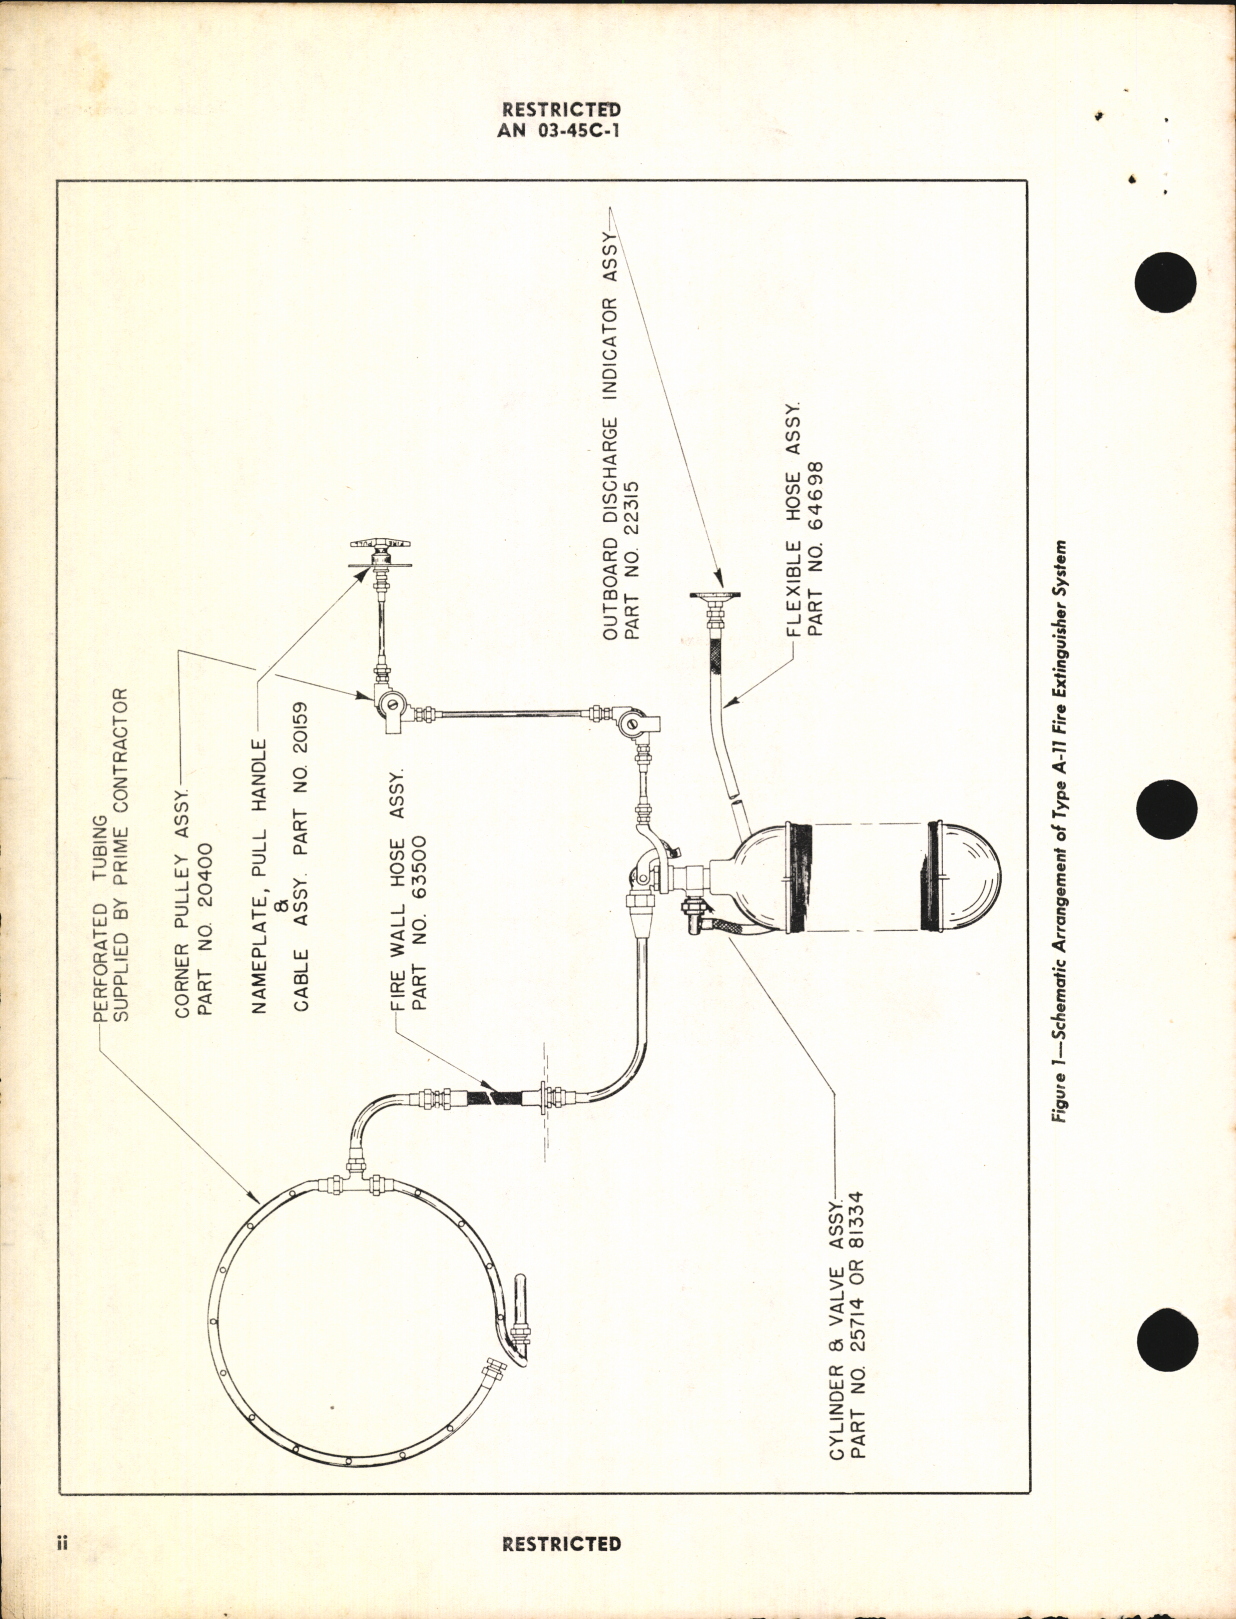 Sample page 4 from AirCorps Library document: Handbook of Instructions with Parts Catalog for Aircraft Fire Extinguisher Systems A-11, -12, and -18